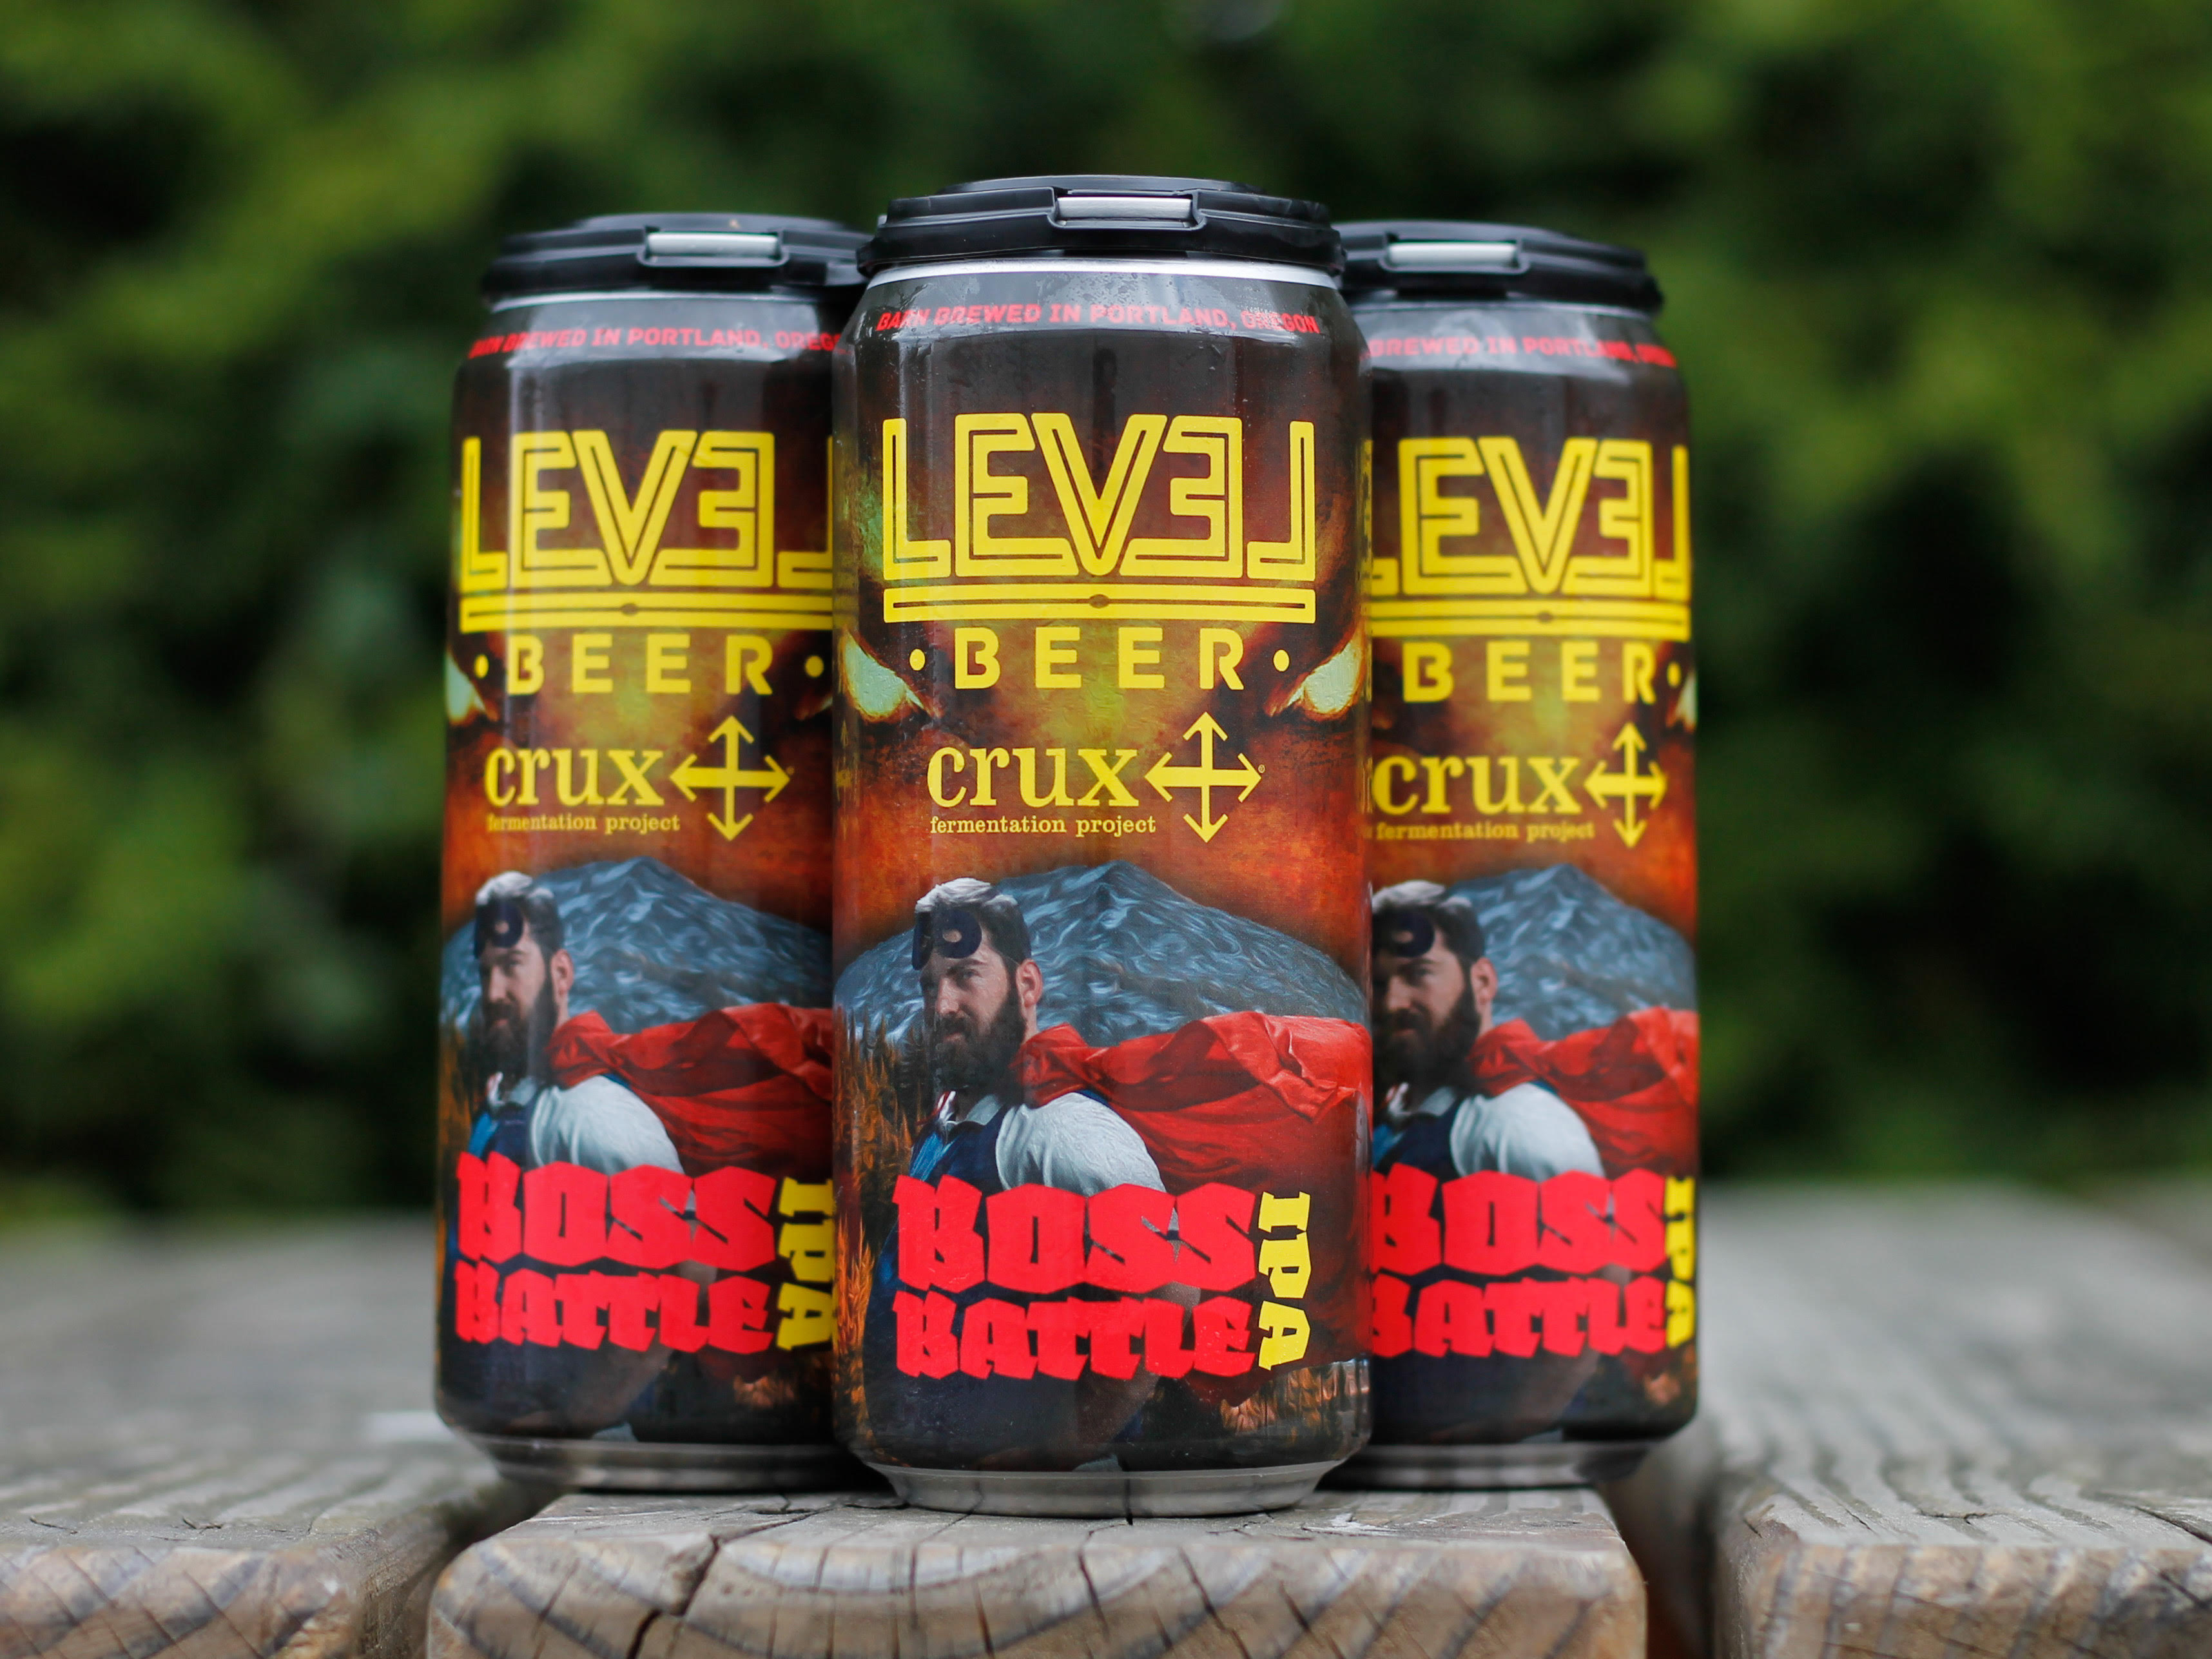 image of Boss Battle IPA, a collaboration from Level Beer and Crux Fermentation Project, courtesy of Level Beer